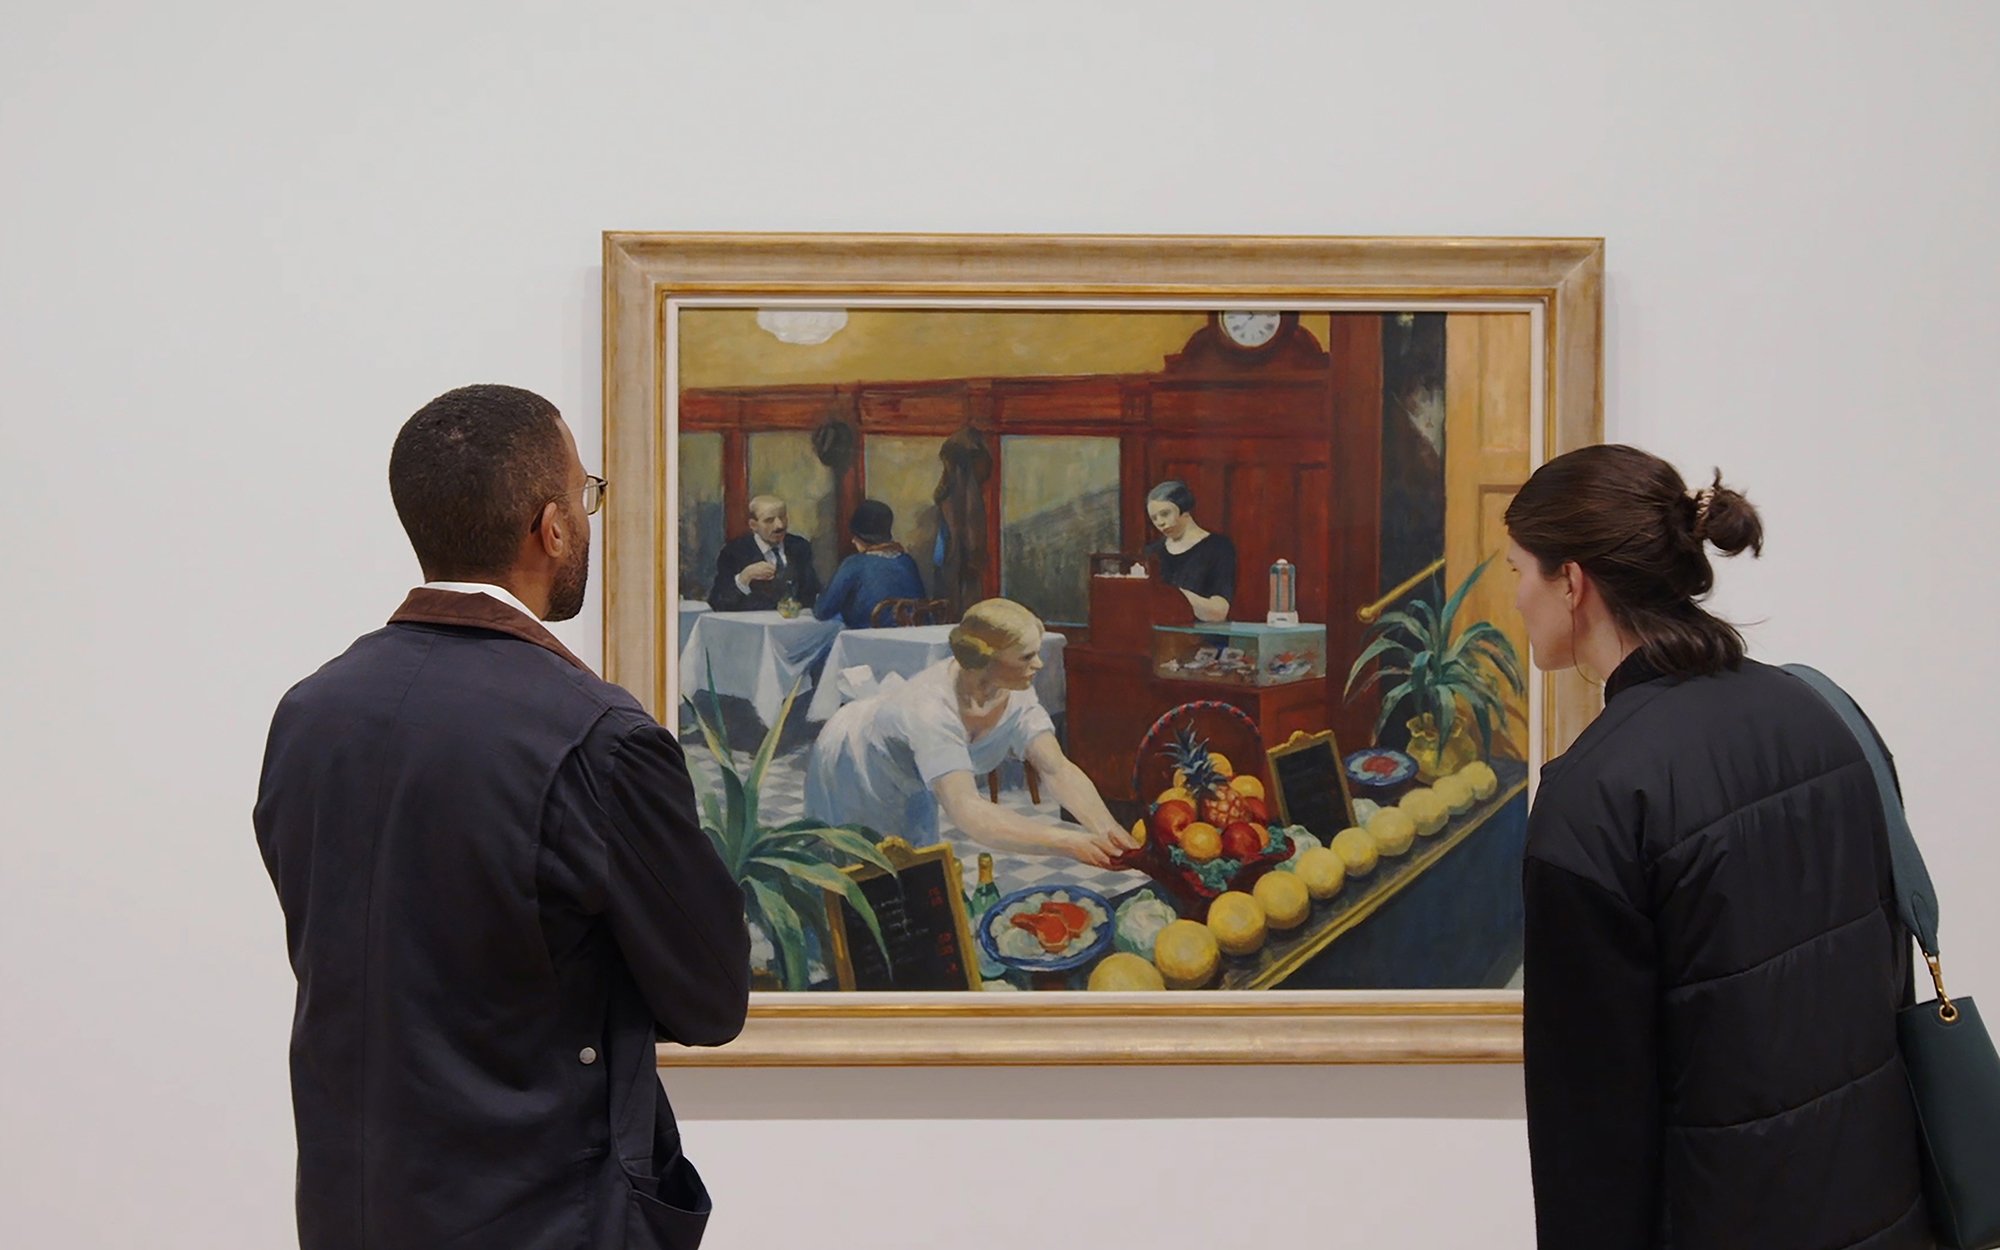 Edward Hopper's New York Paintings Oscillate Between Public and